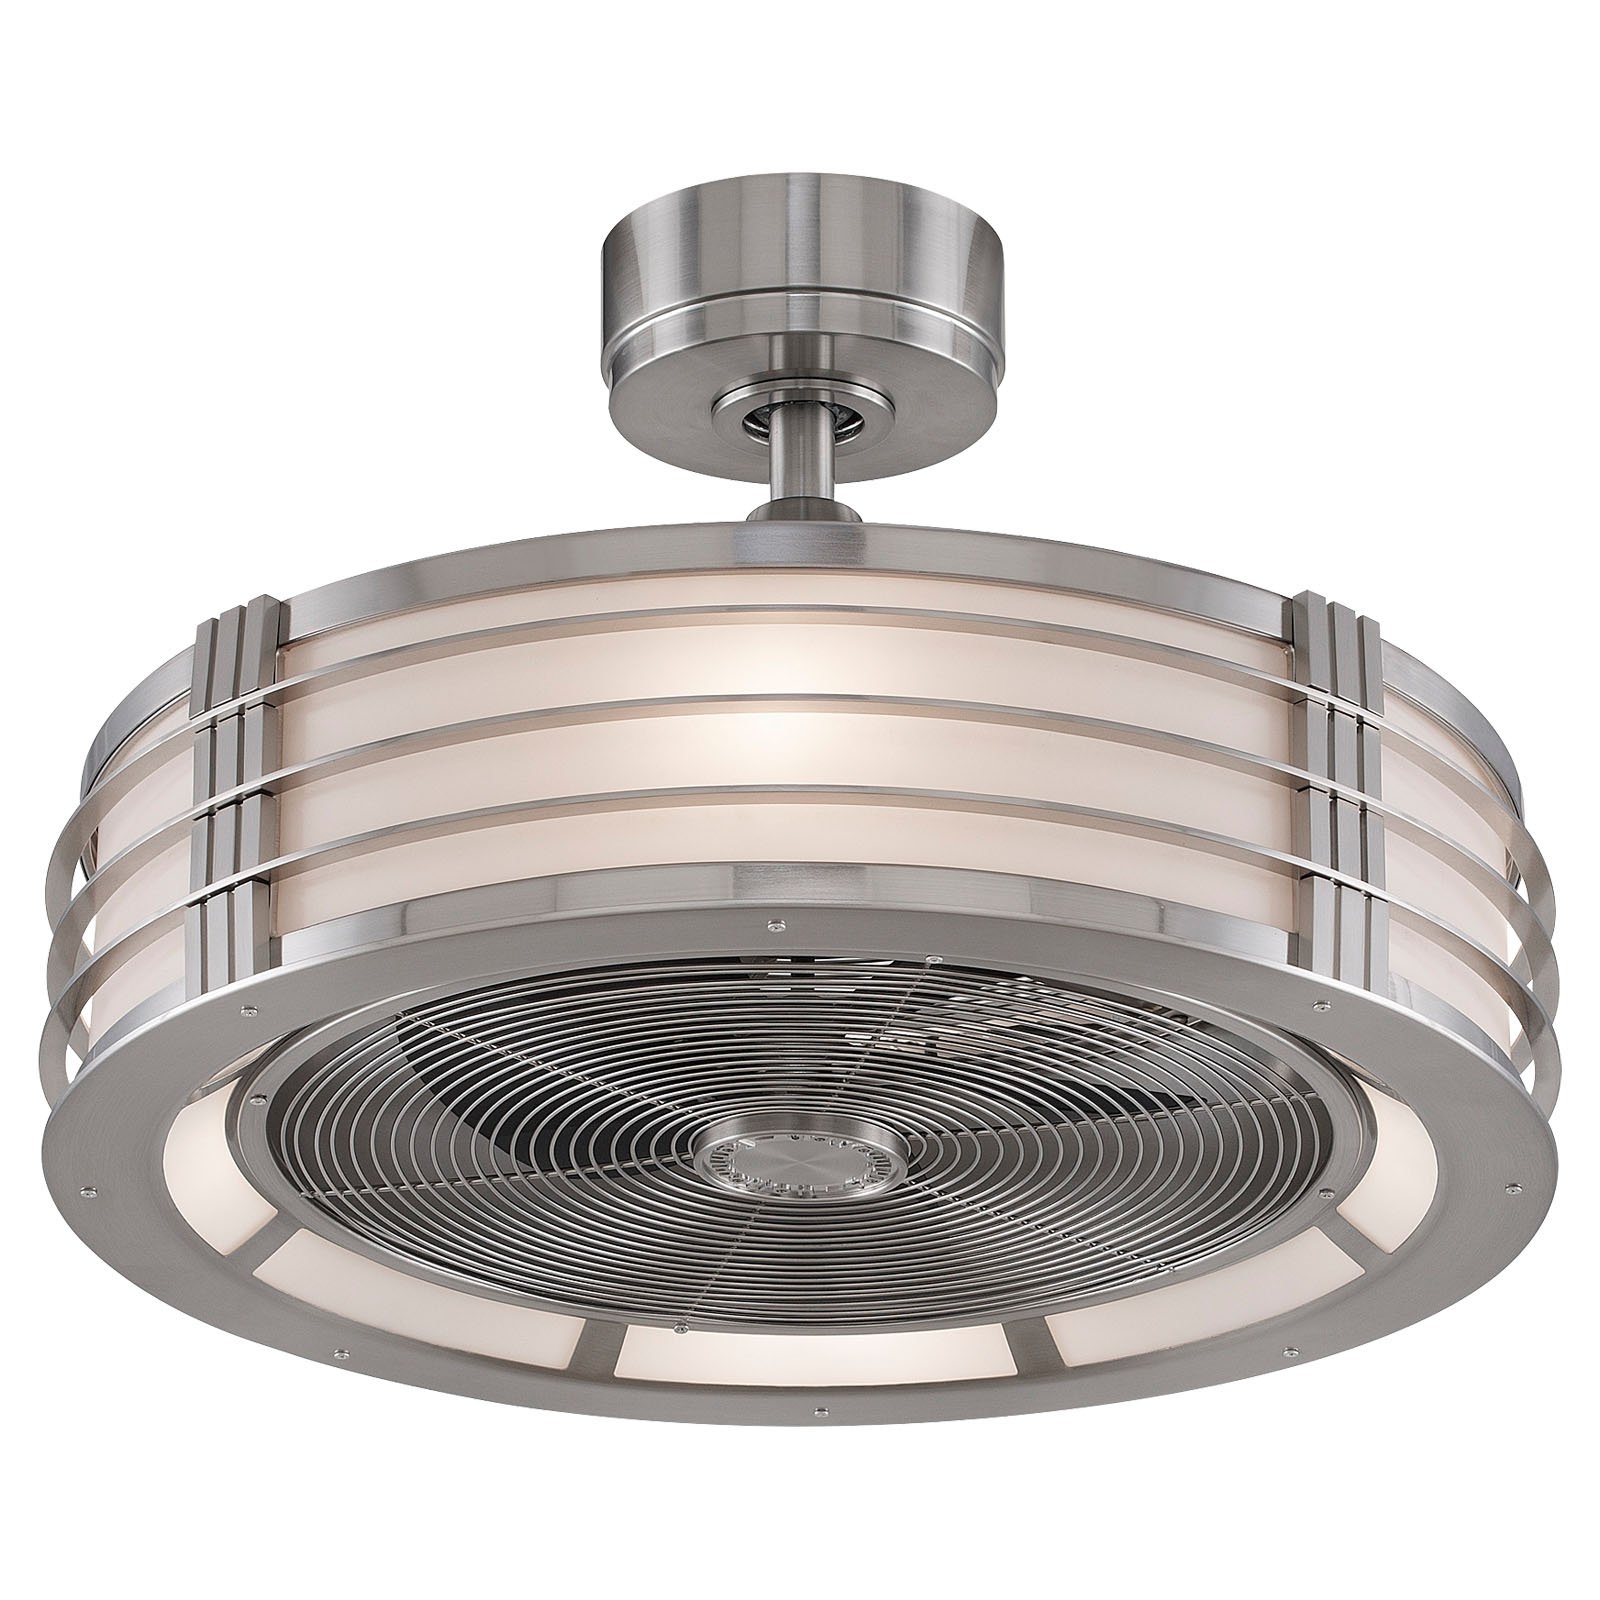 Exhale Bladeless Ceiling Fan With Light